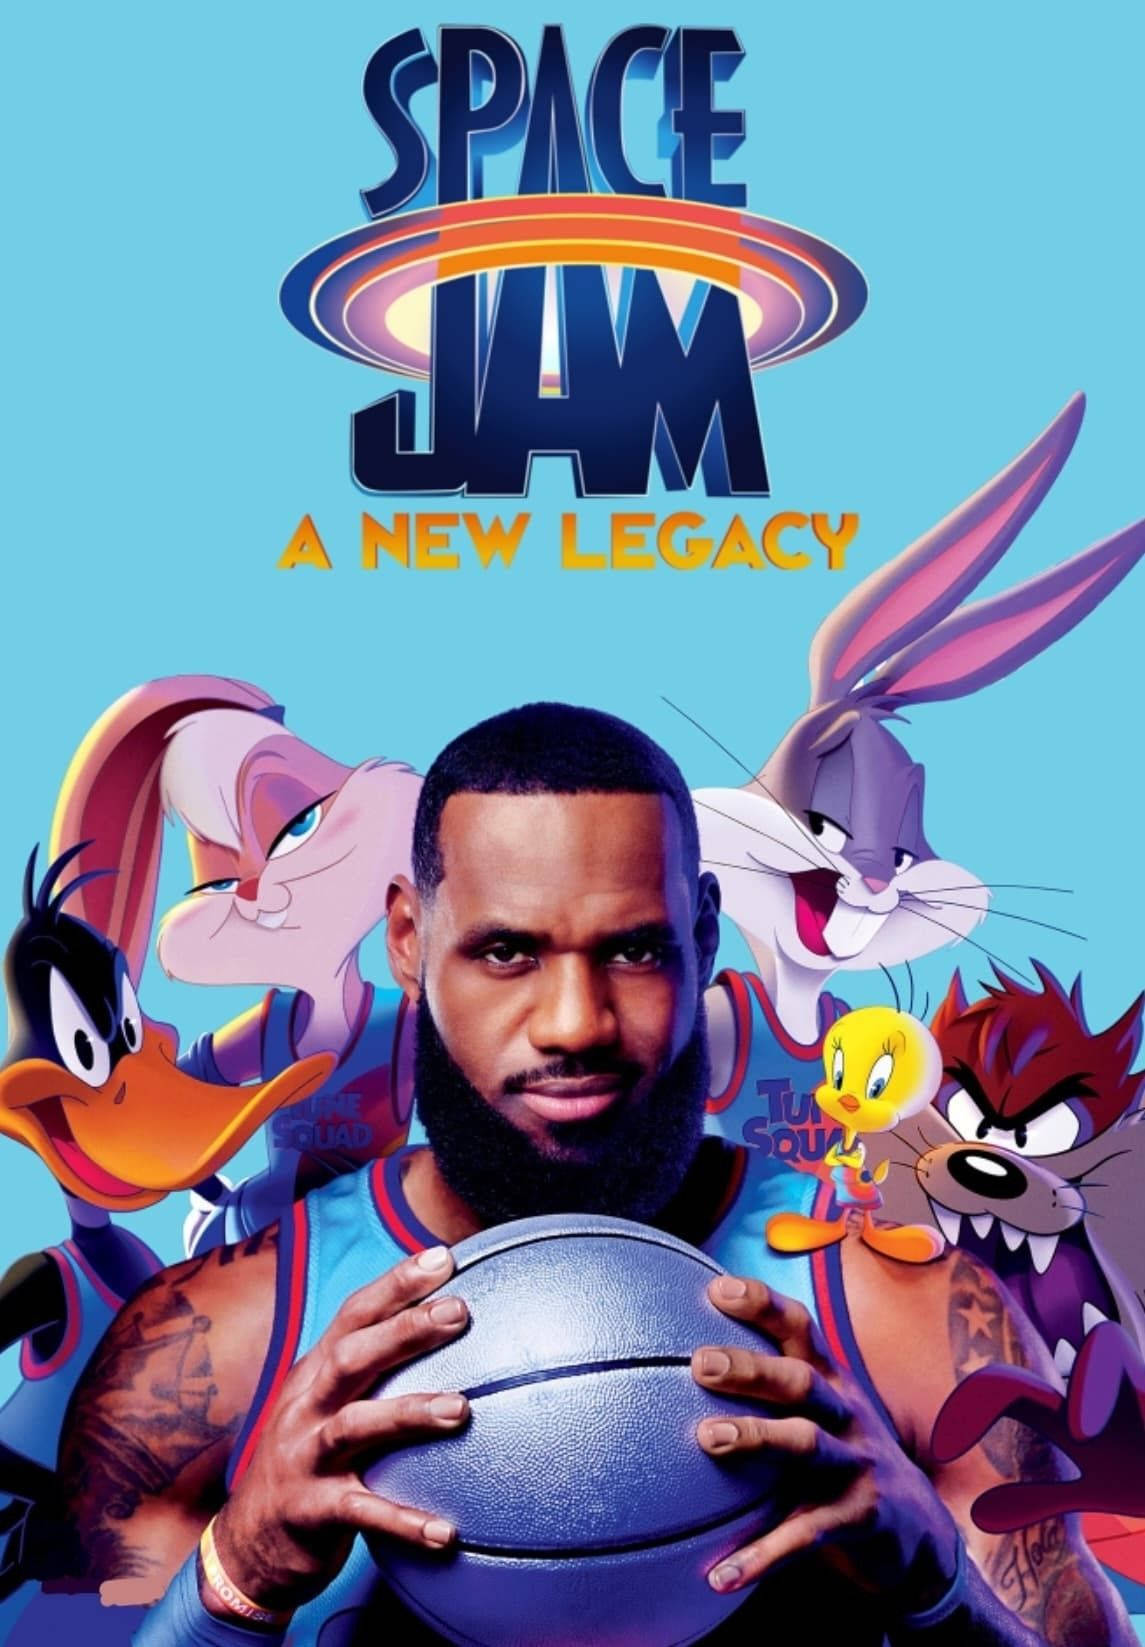 Space Jam 2 LeBron James Character Poster 4K Phone iPhone Wallpaper 8540a